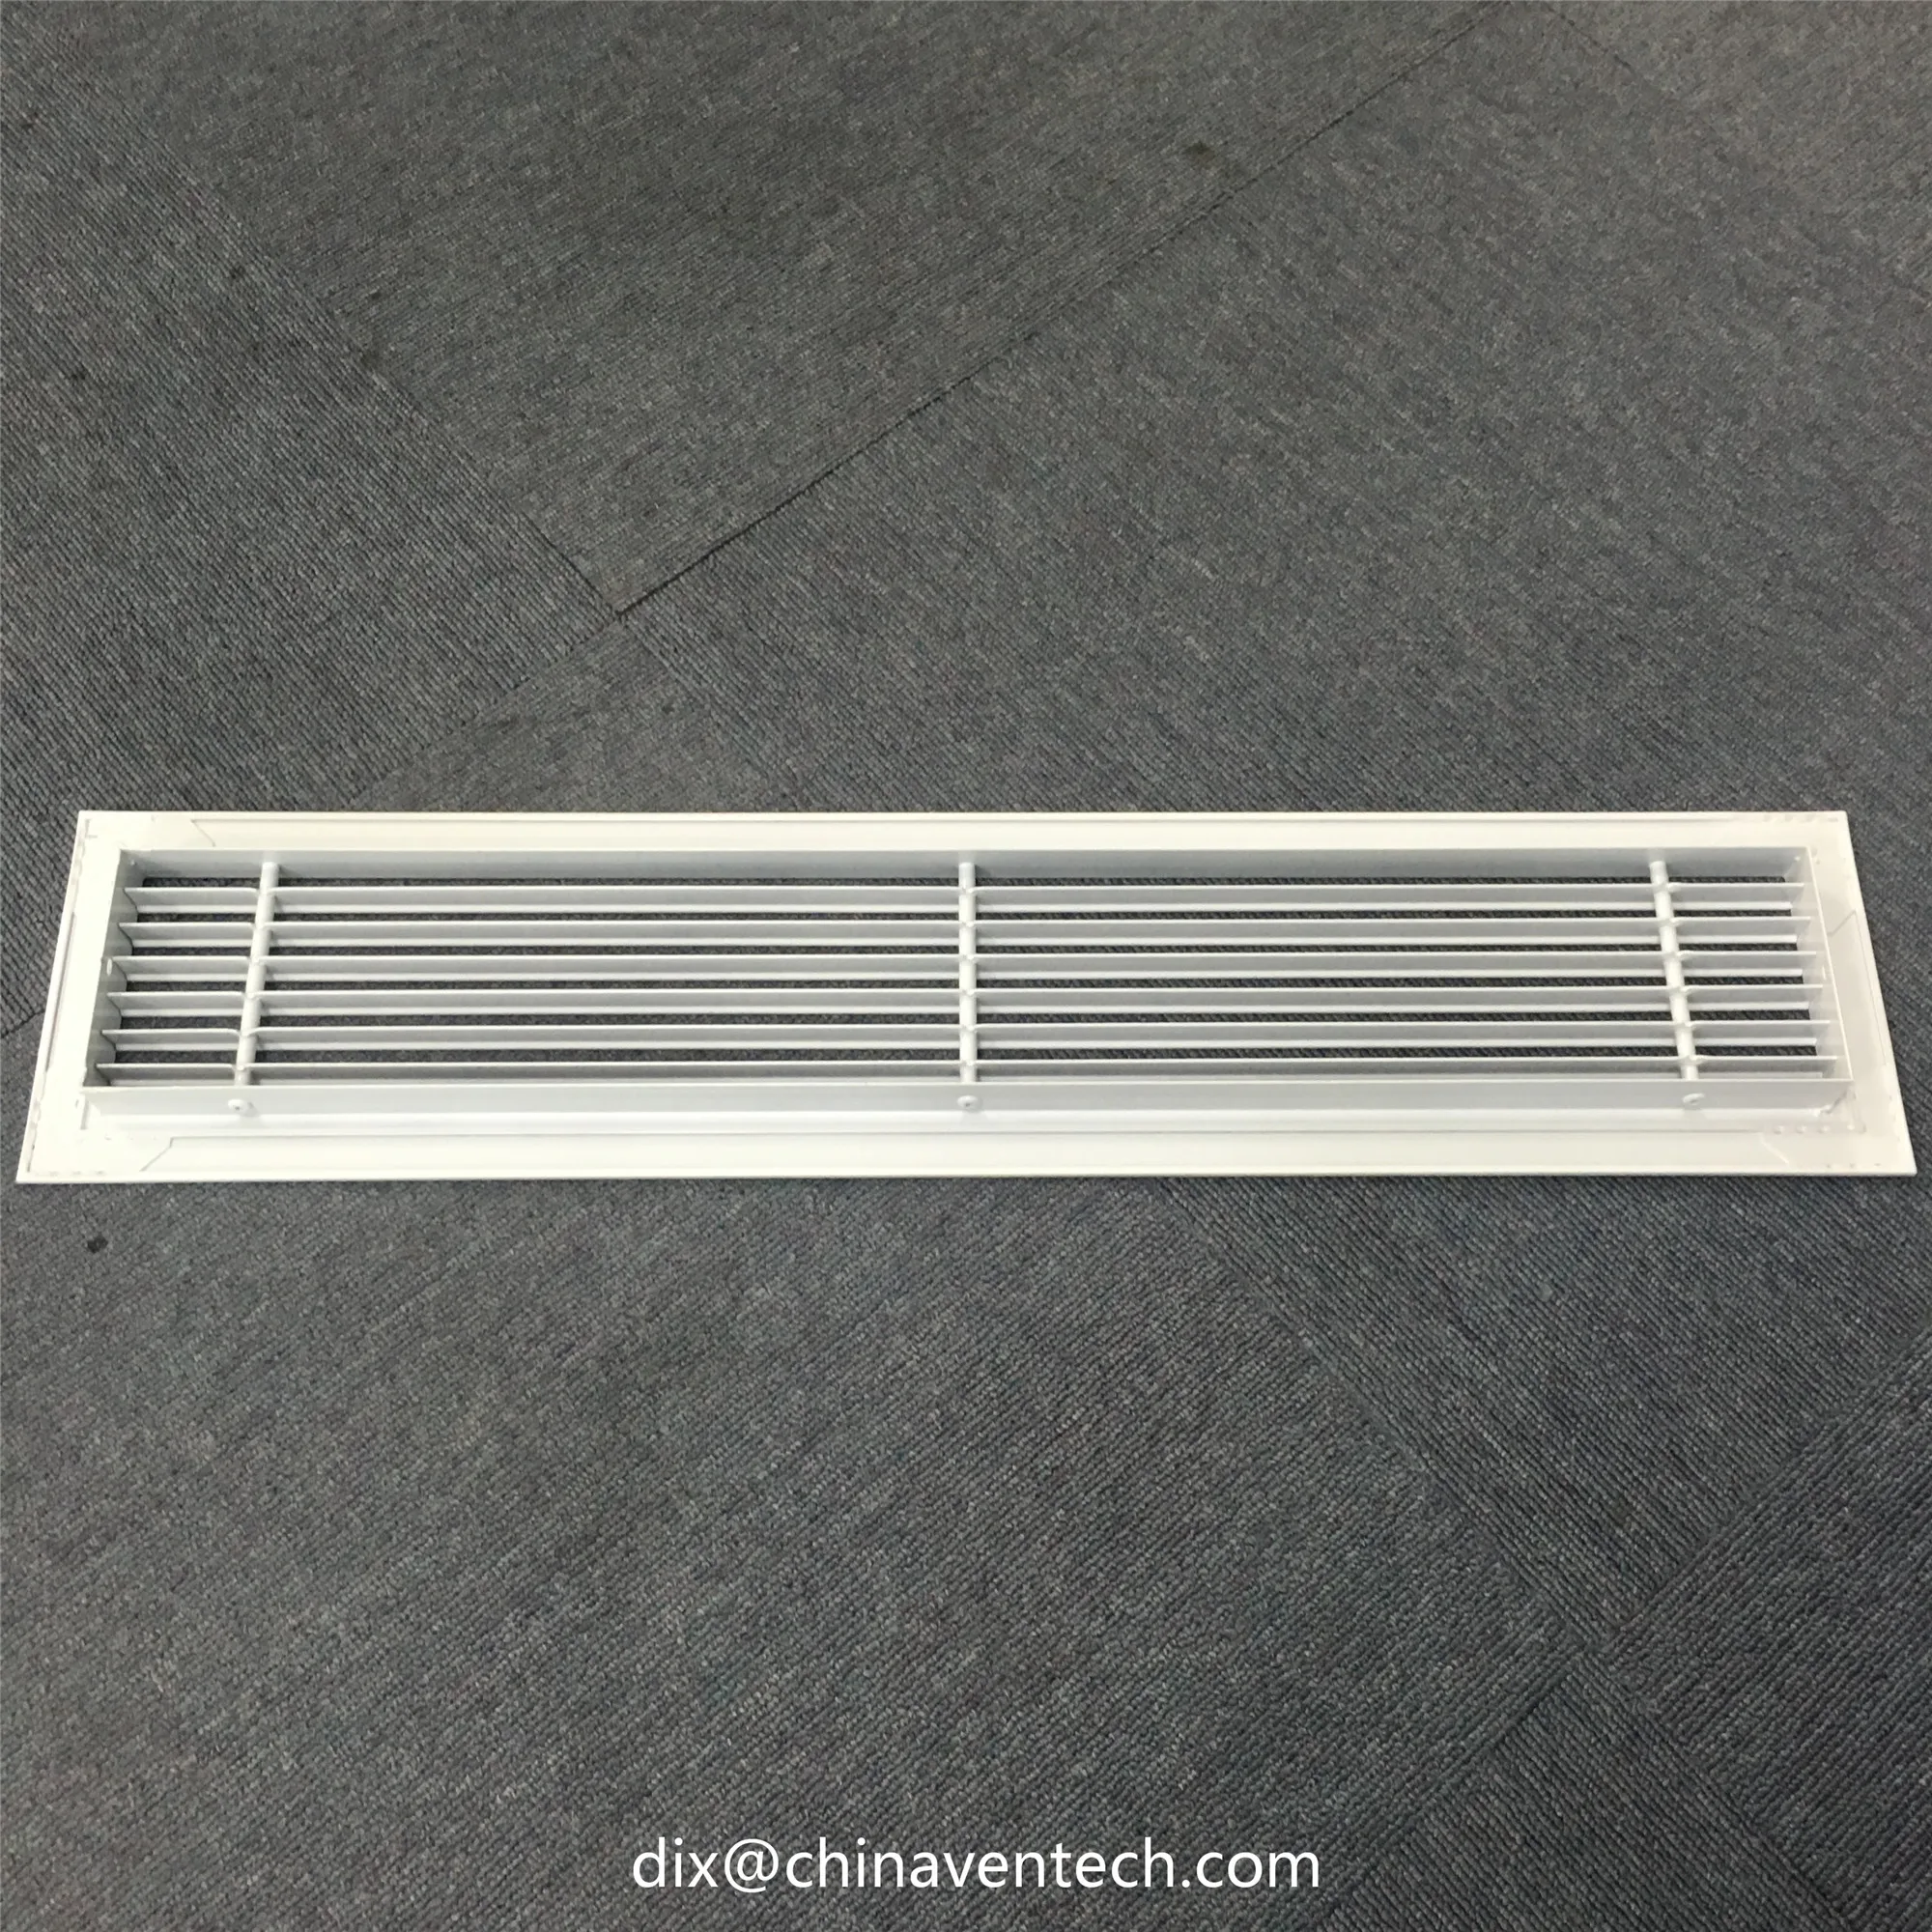 Hvac Parts & Systems Air Conditioning Aluminum LInear Bar Type Louver Exhaust Air Grille Air Diffuser